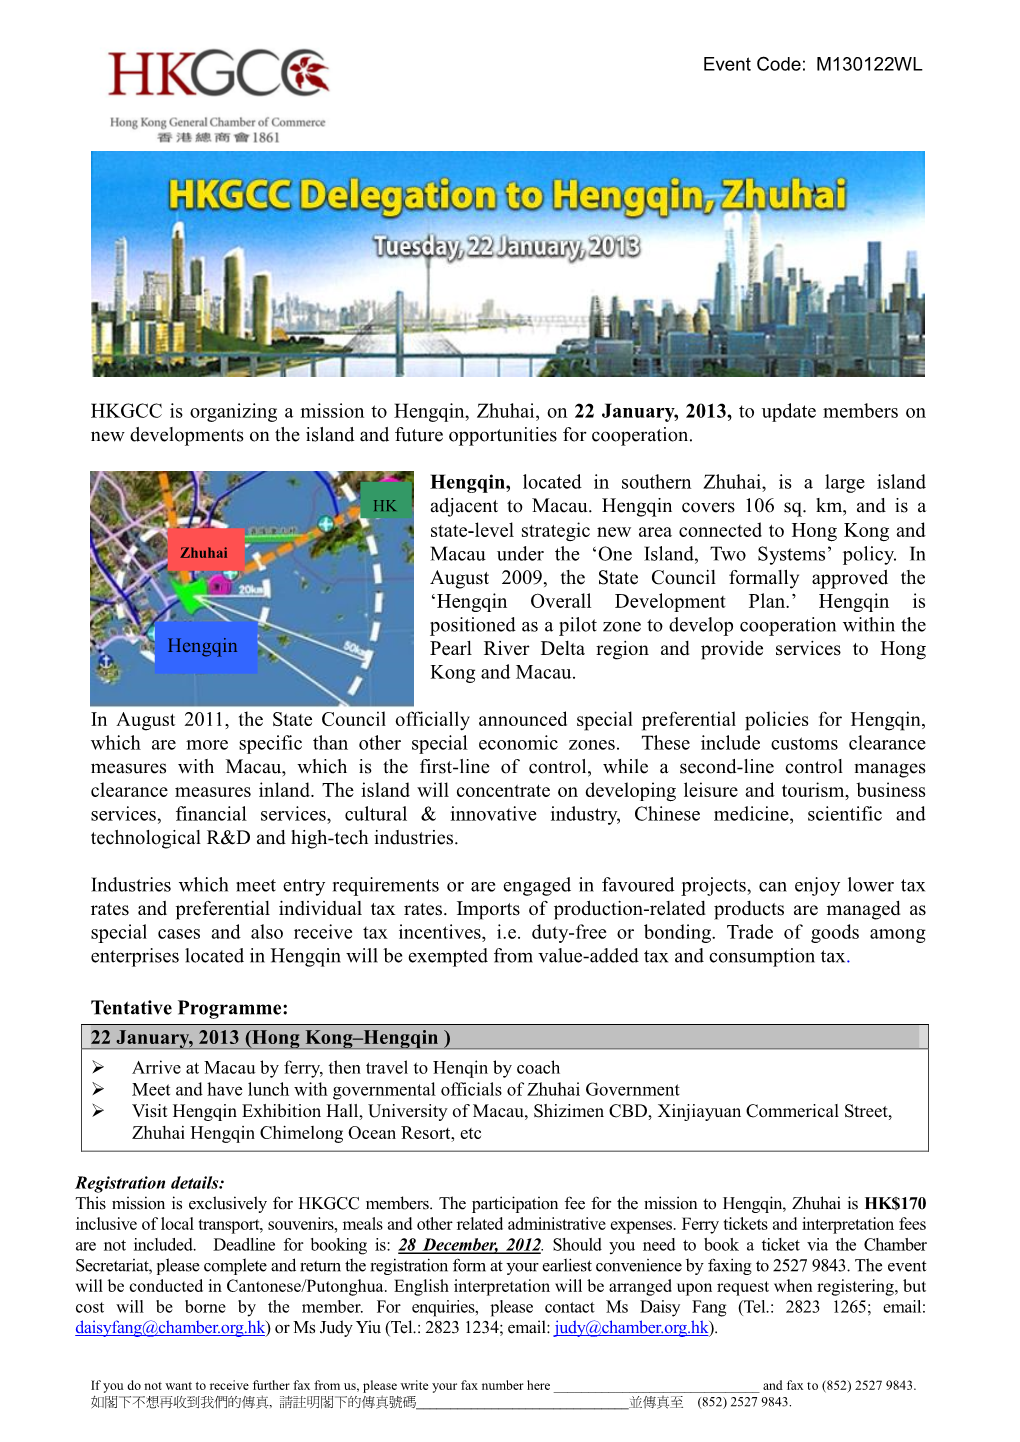 HKGCC Is Organizing a Mission to Hengqin, Zhuhai, on 22 January, 2013, to Update Members on New Developments on the Island and Future Opportunities for Cooperation